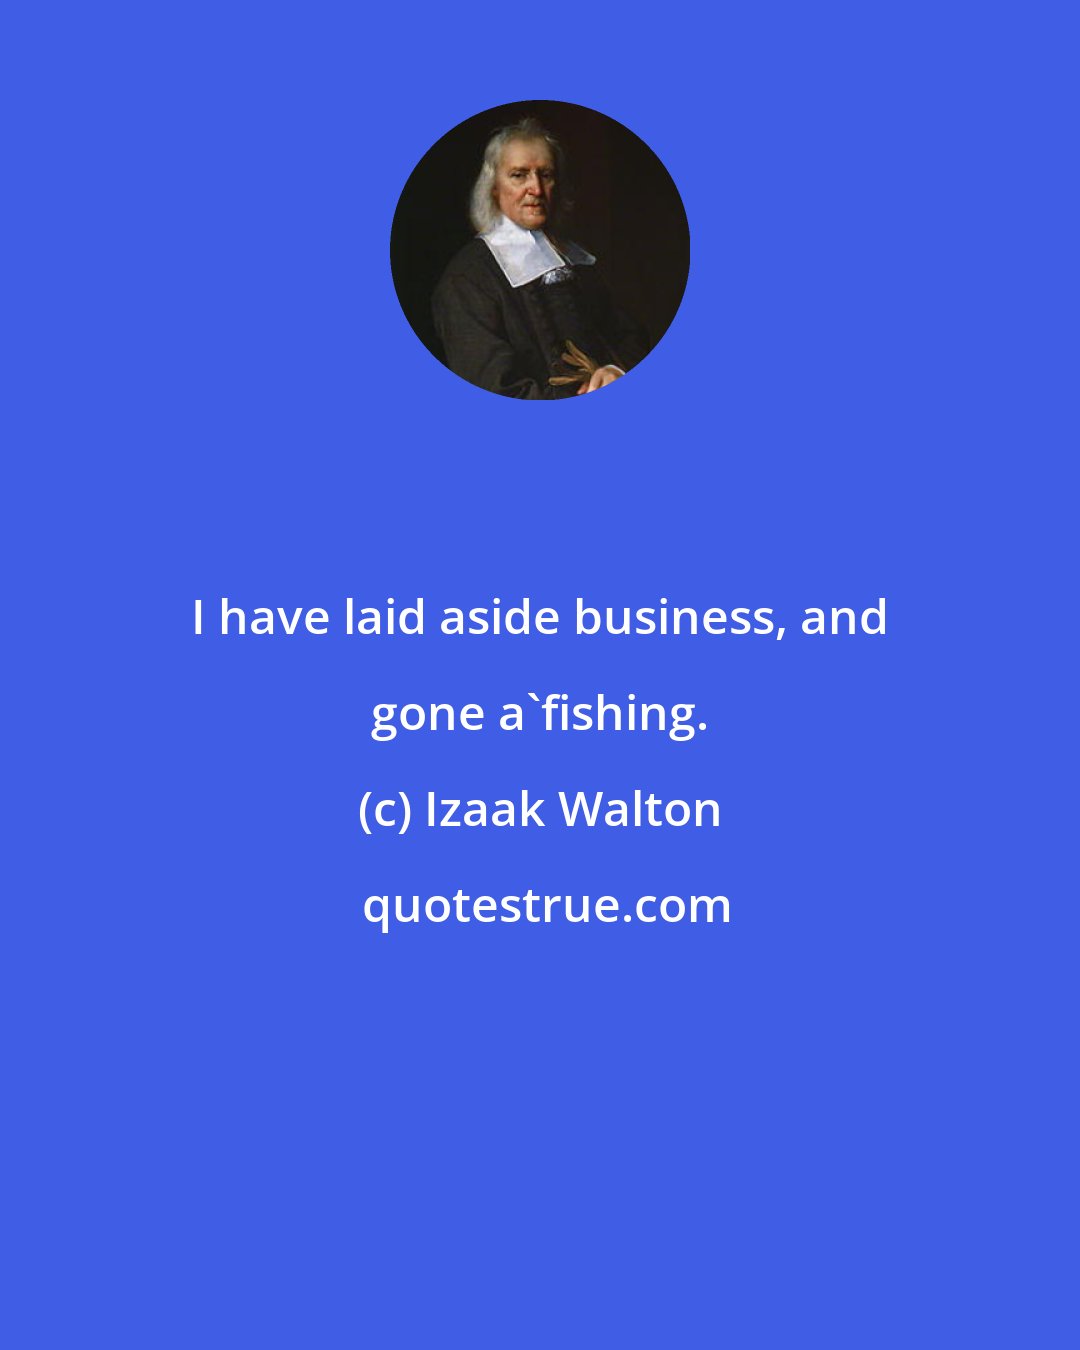 Izaak Walton: I have laid aside business, and gone a'fishing.